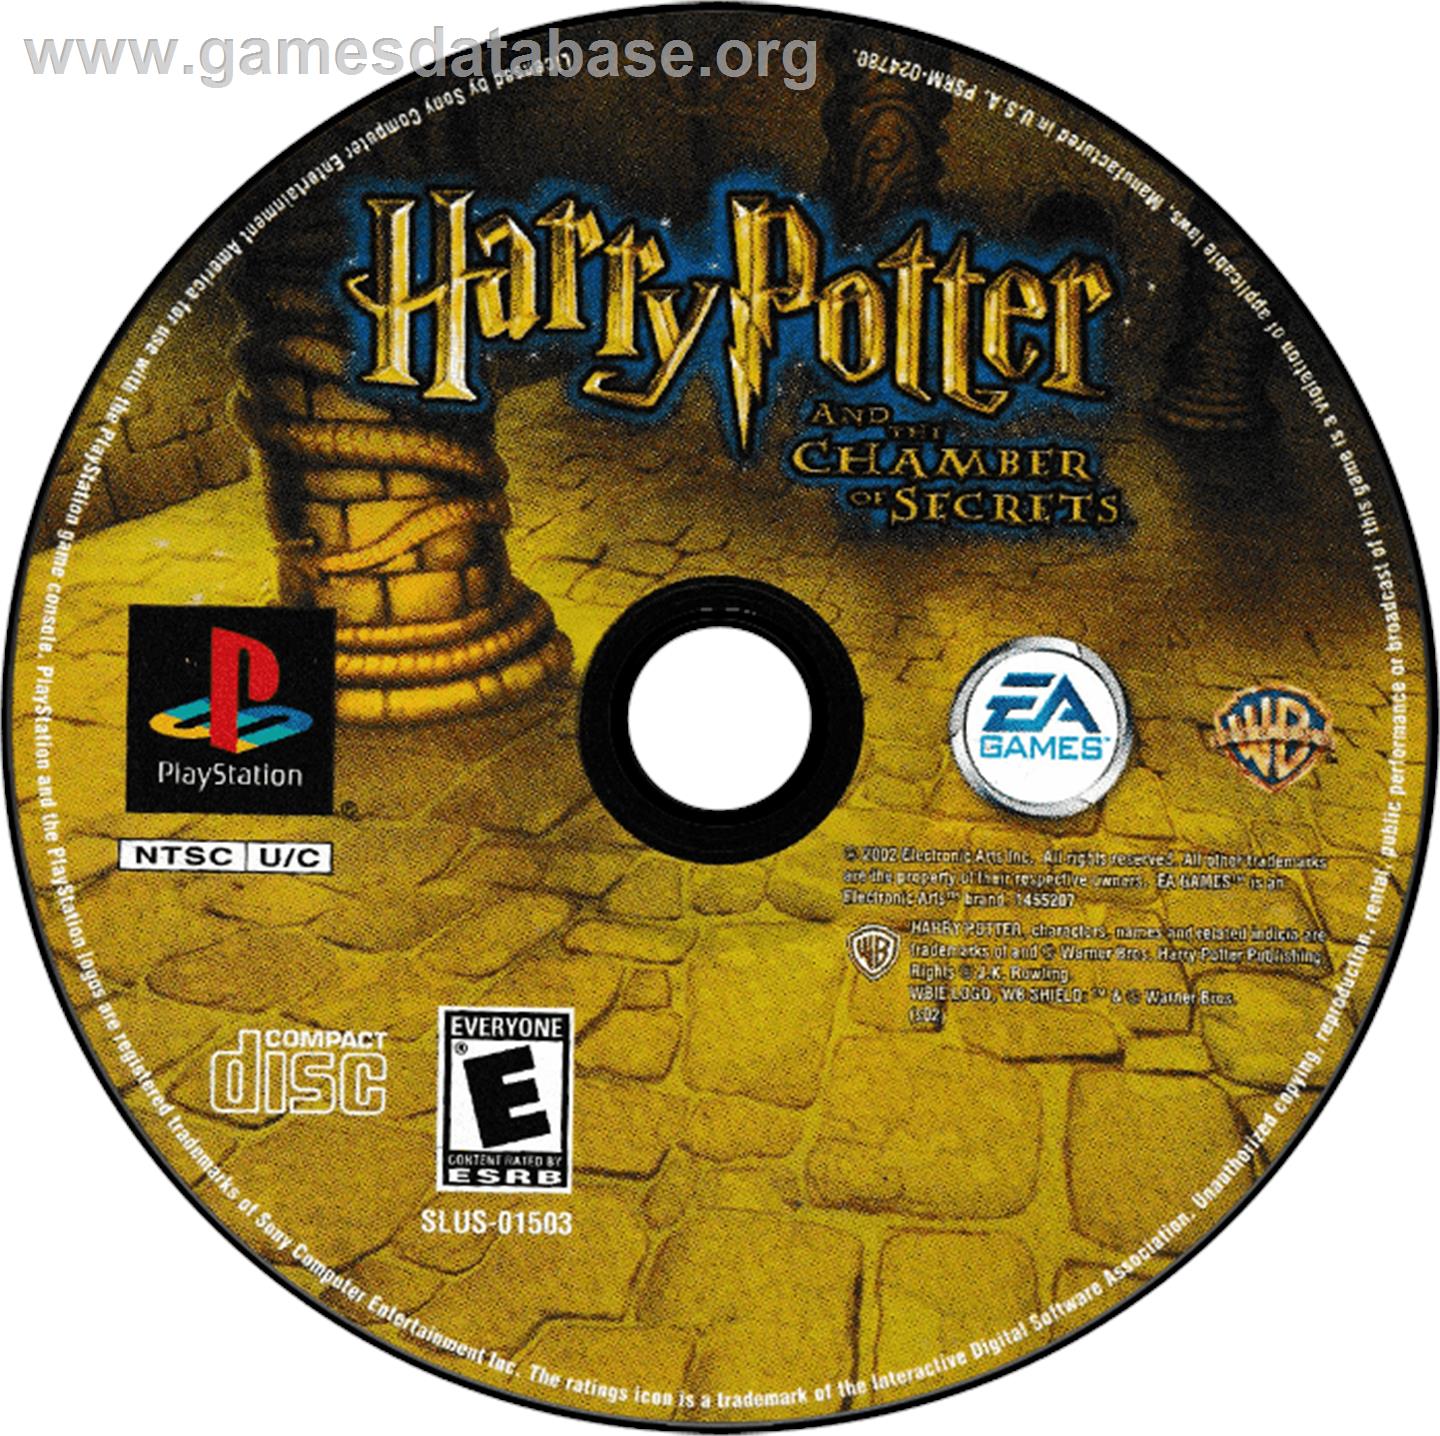 Harry Potter and the Chamber of Secrets - Sony Playstation - Artwork - Disc